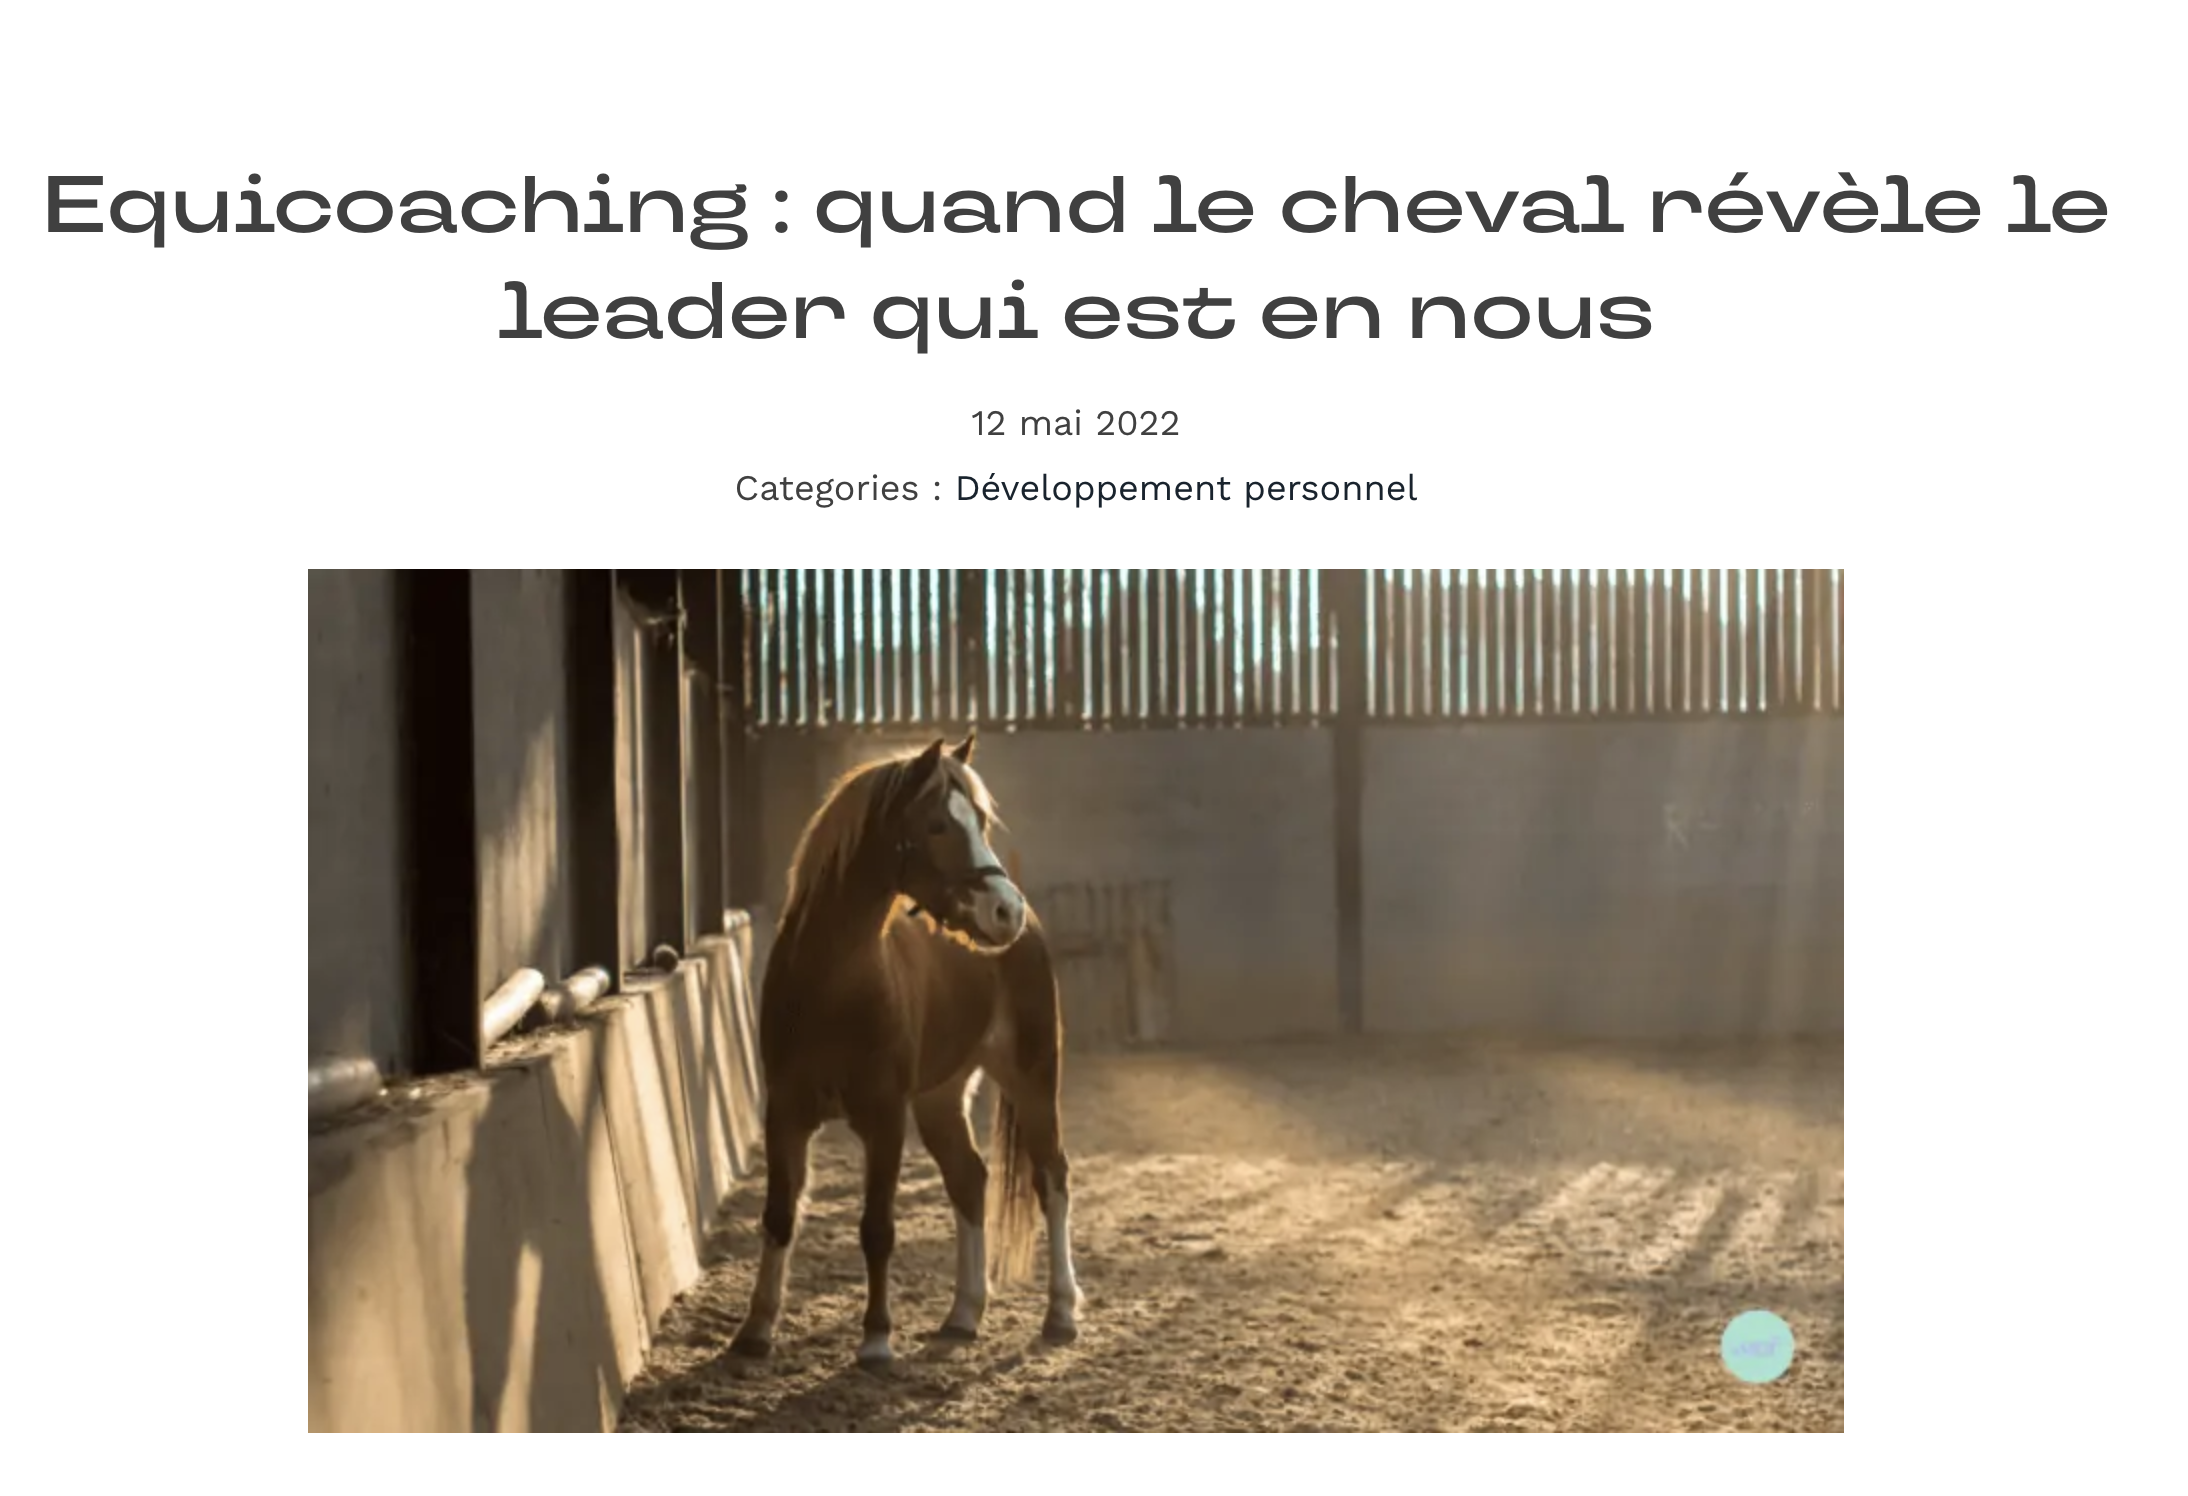 article-presse-equicoatching